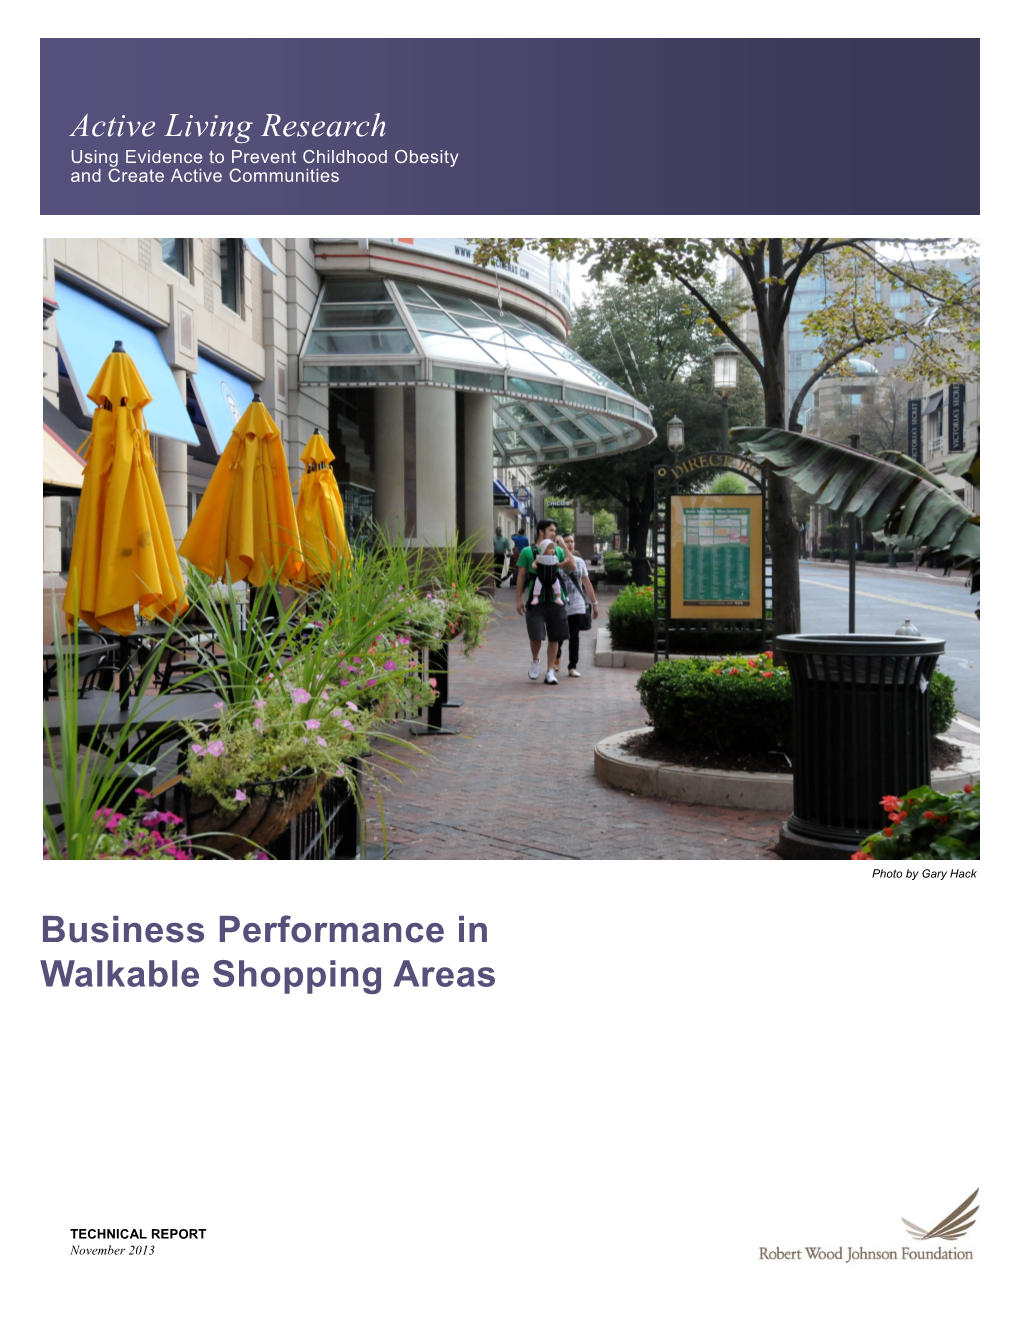 Business Performance in Walkable Shopping Areas